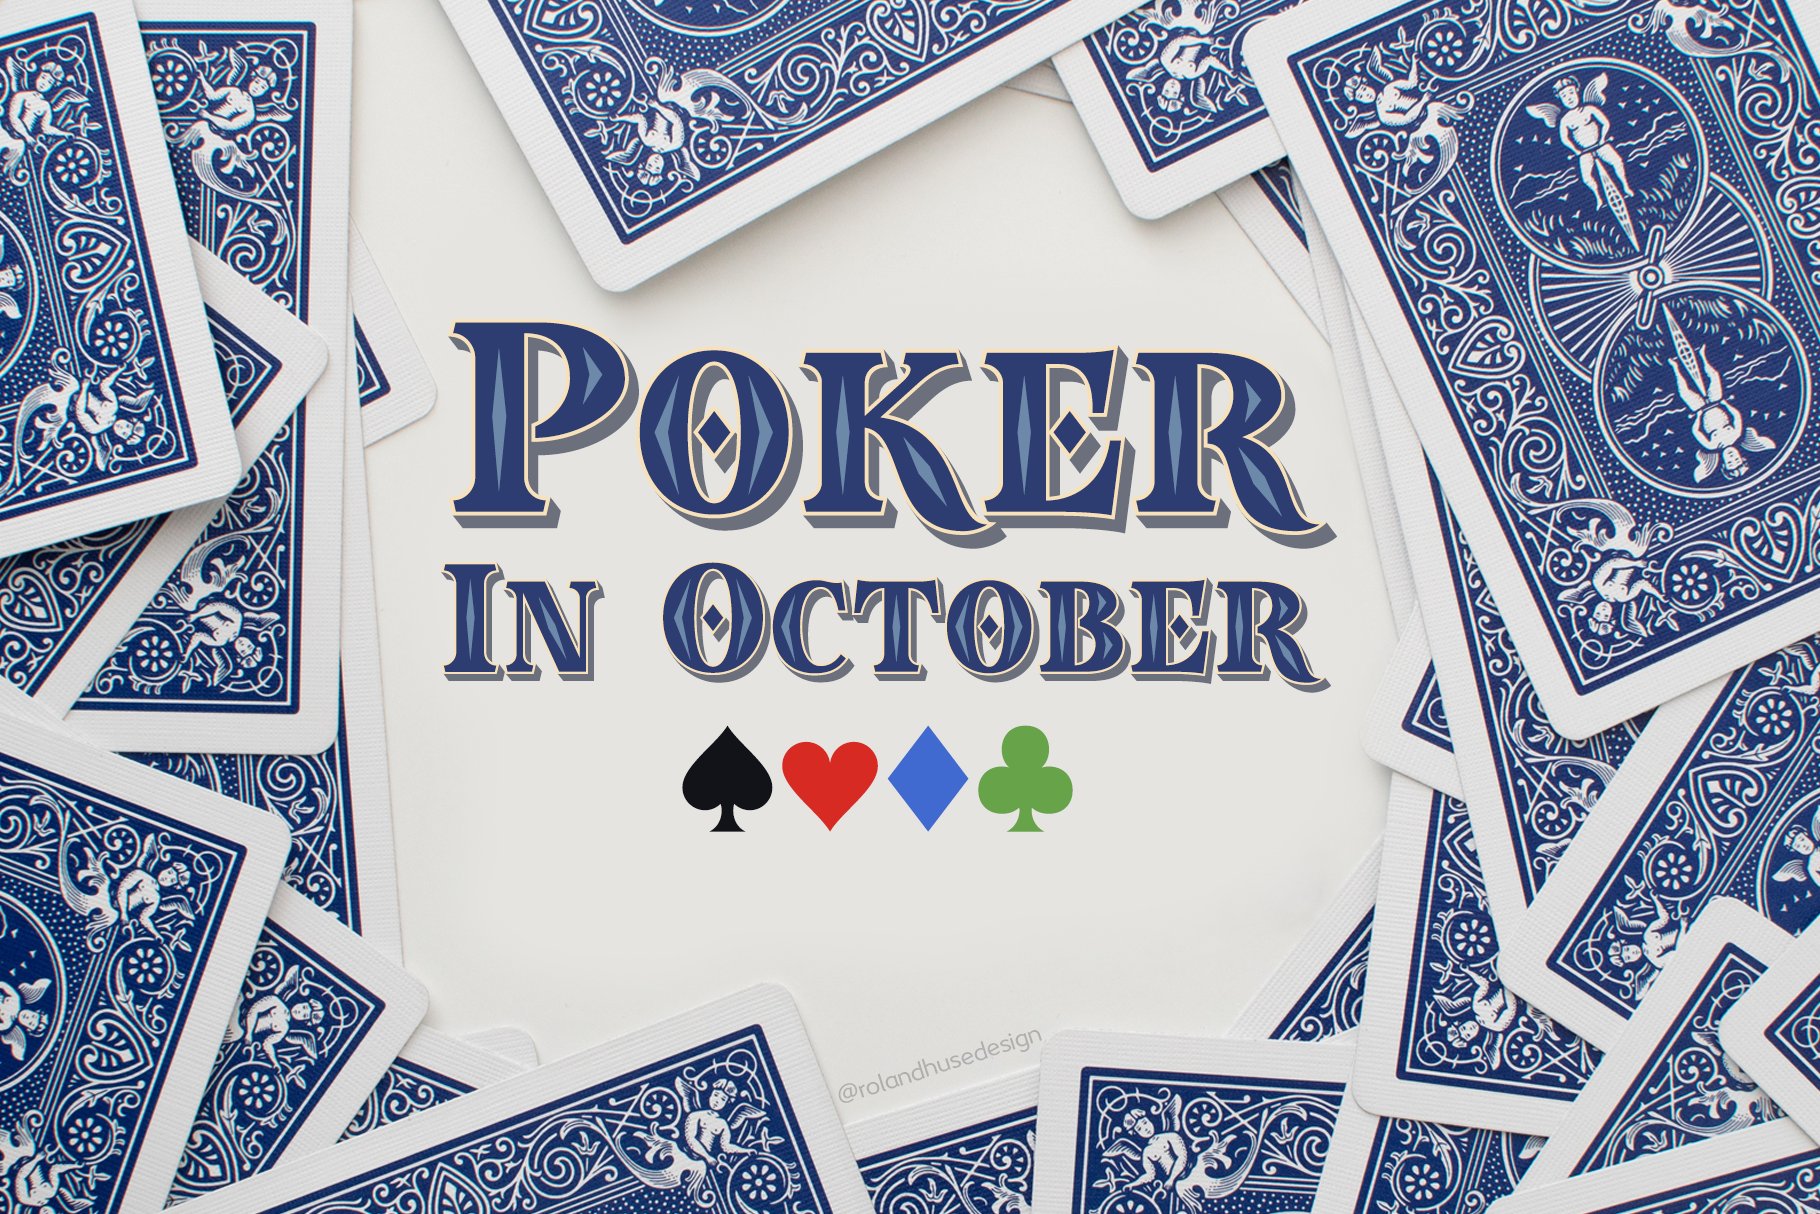 Poker In October Layered Color Font cover image.